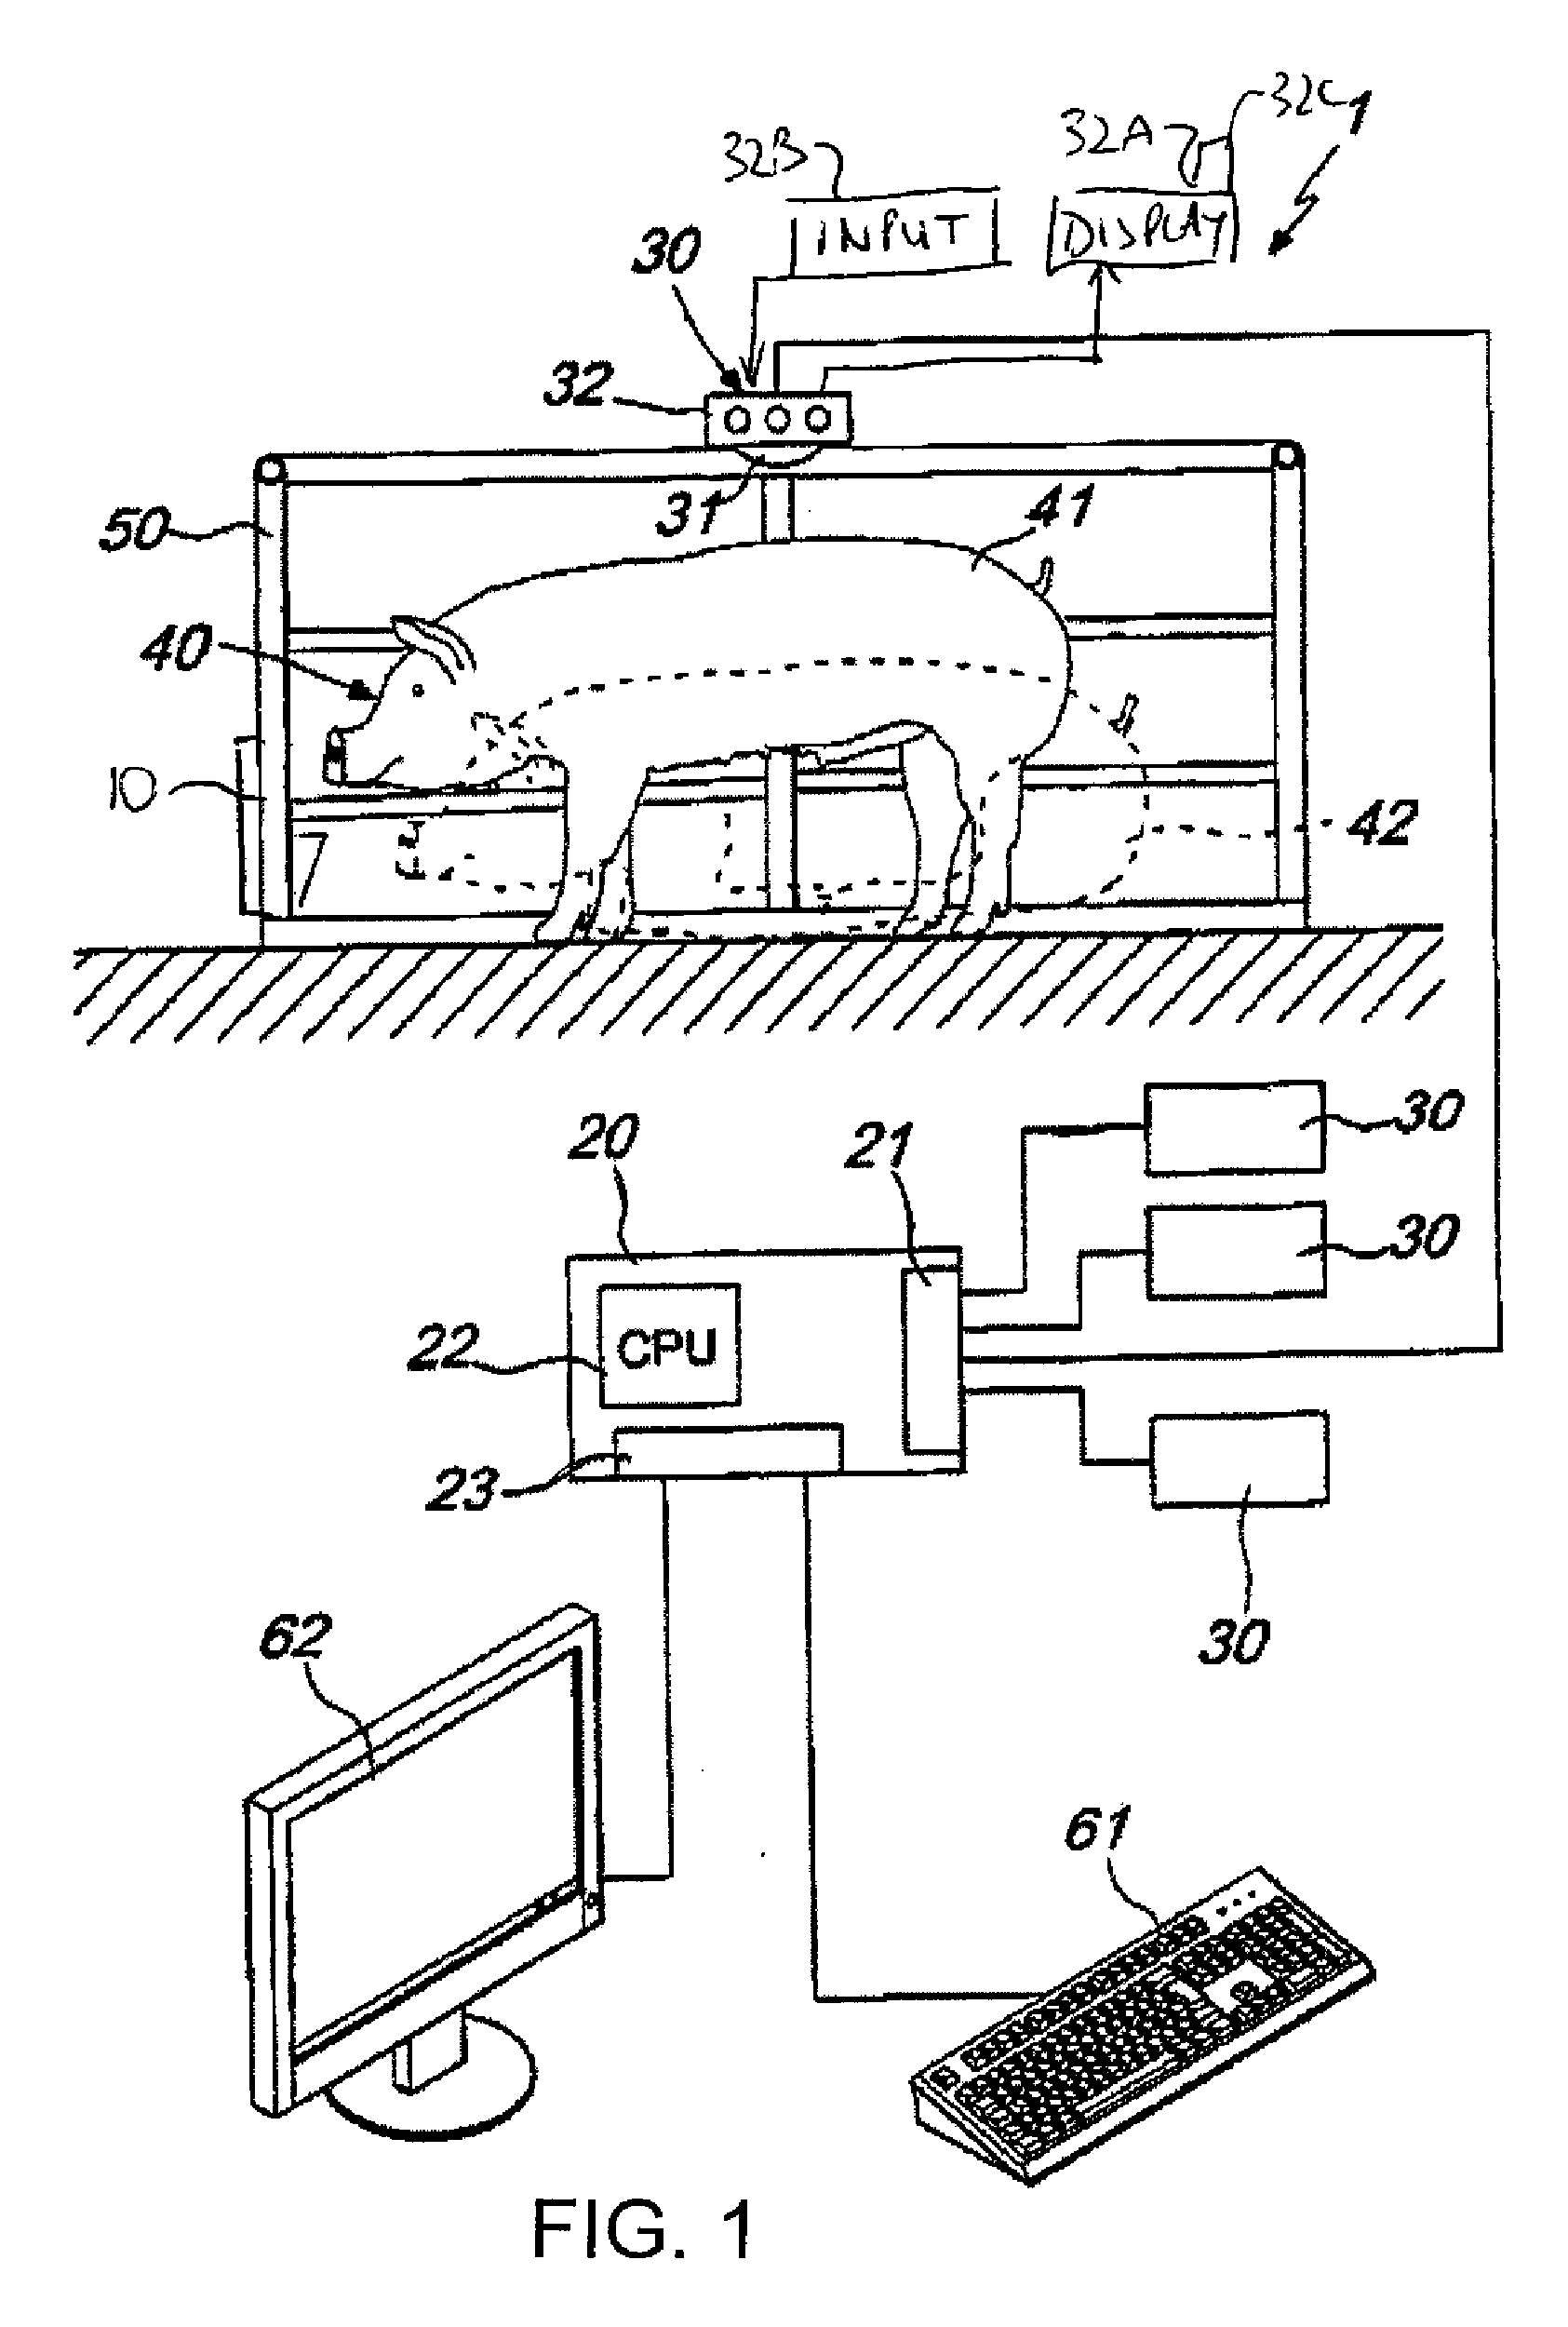 Method for monitoring estrus, ovulation of animals, for planning a useful fertilization time zone and a preferred fertilization time zone